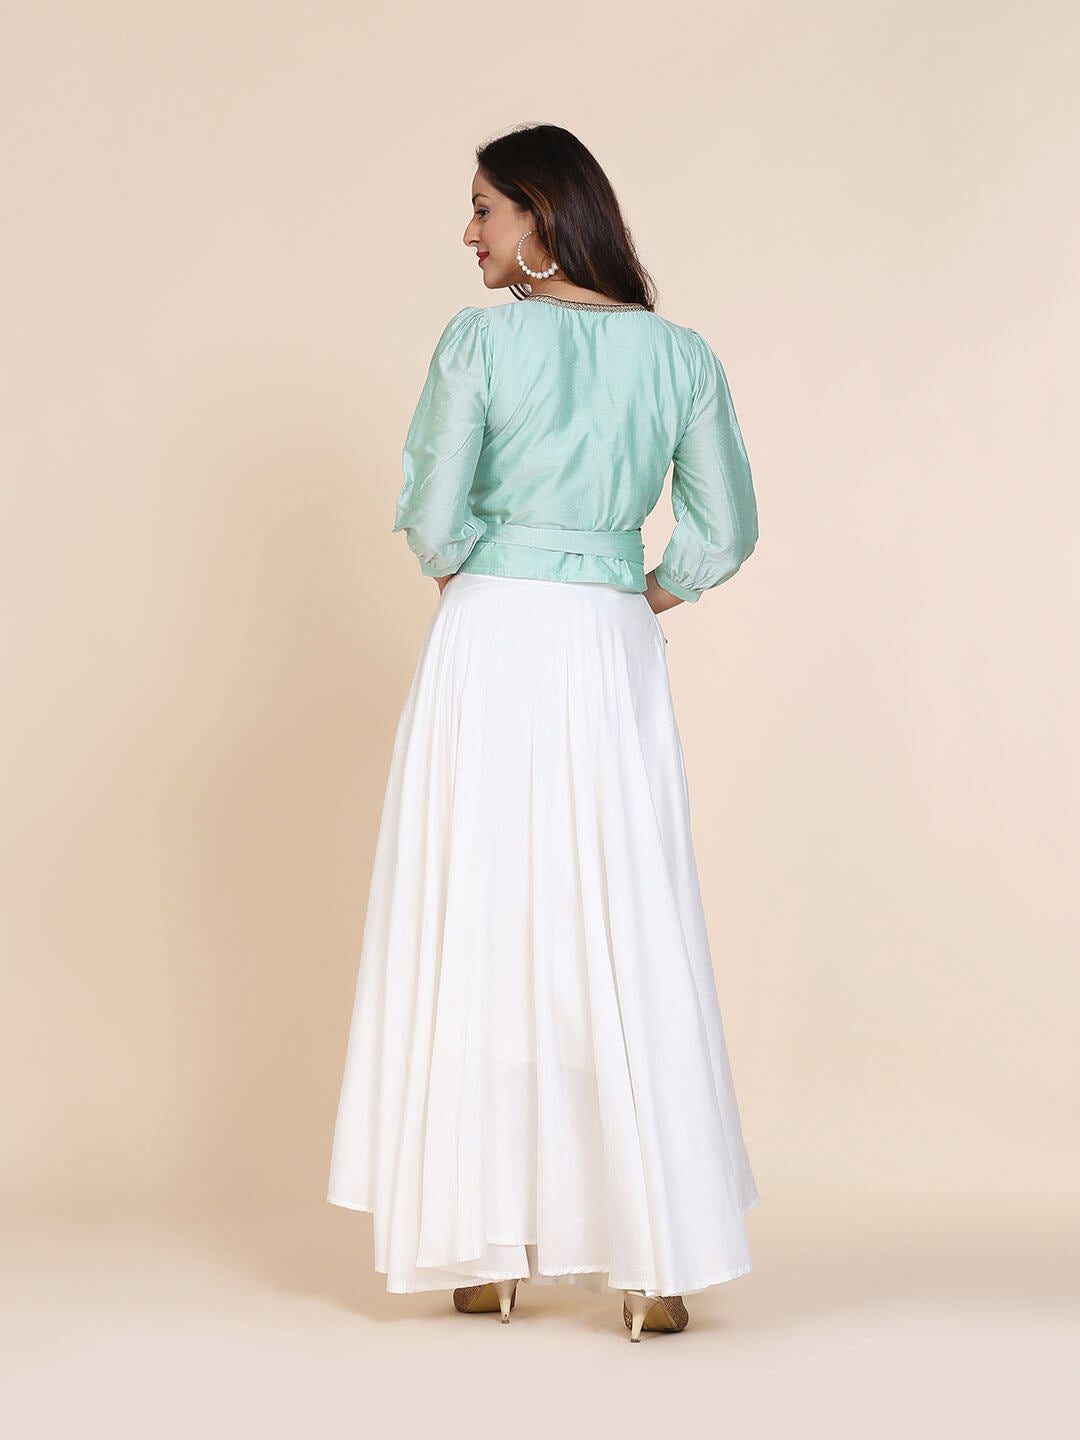 Abhsihti cotton silk wrap around top with gathered sleeves and skirt